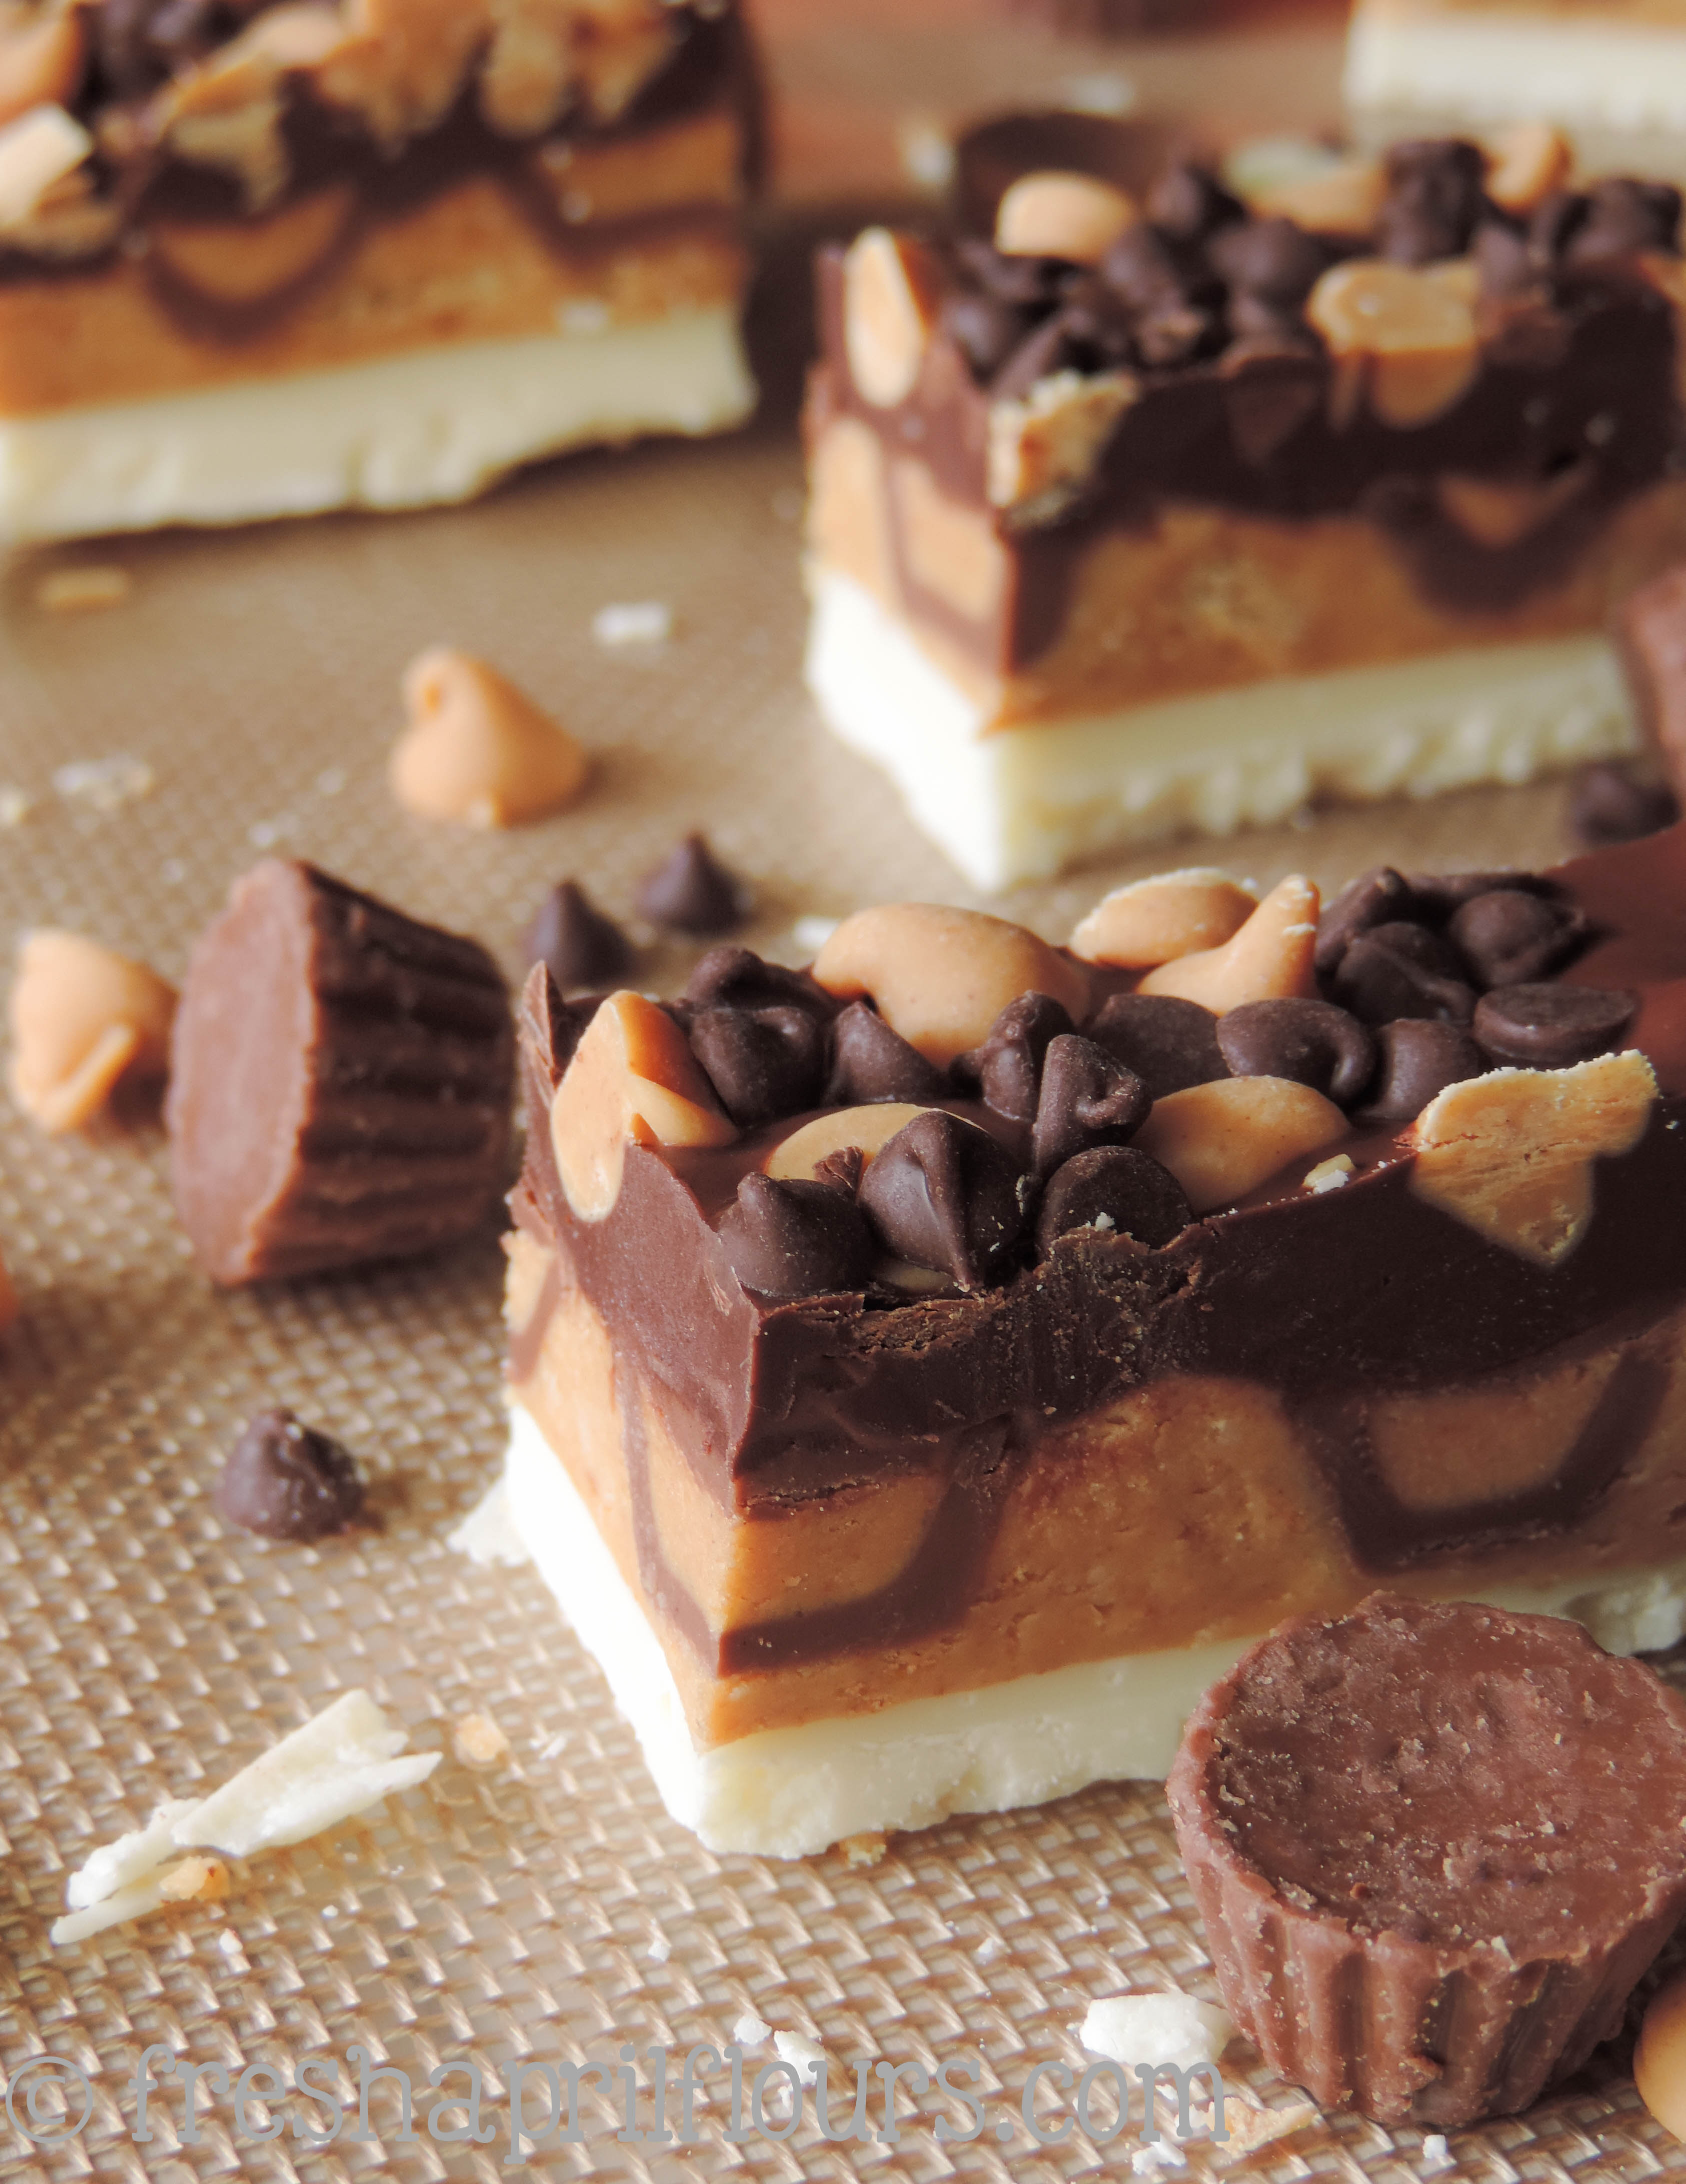 Triple Chocolate Peanut Butter Bites: A slightly crunchy peanut butter cup layer, sandwiched between dark and white chocolate layers, and topped off with some more chocolate and peanut butter!